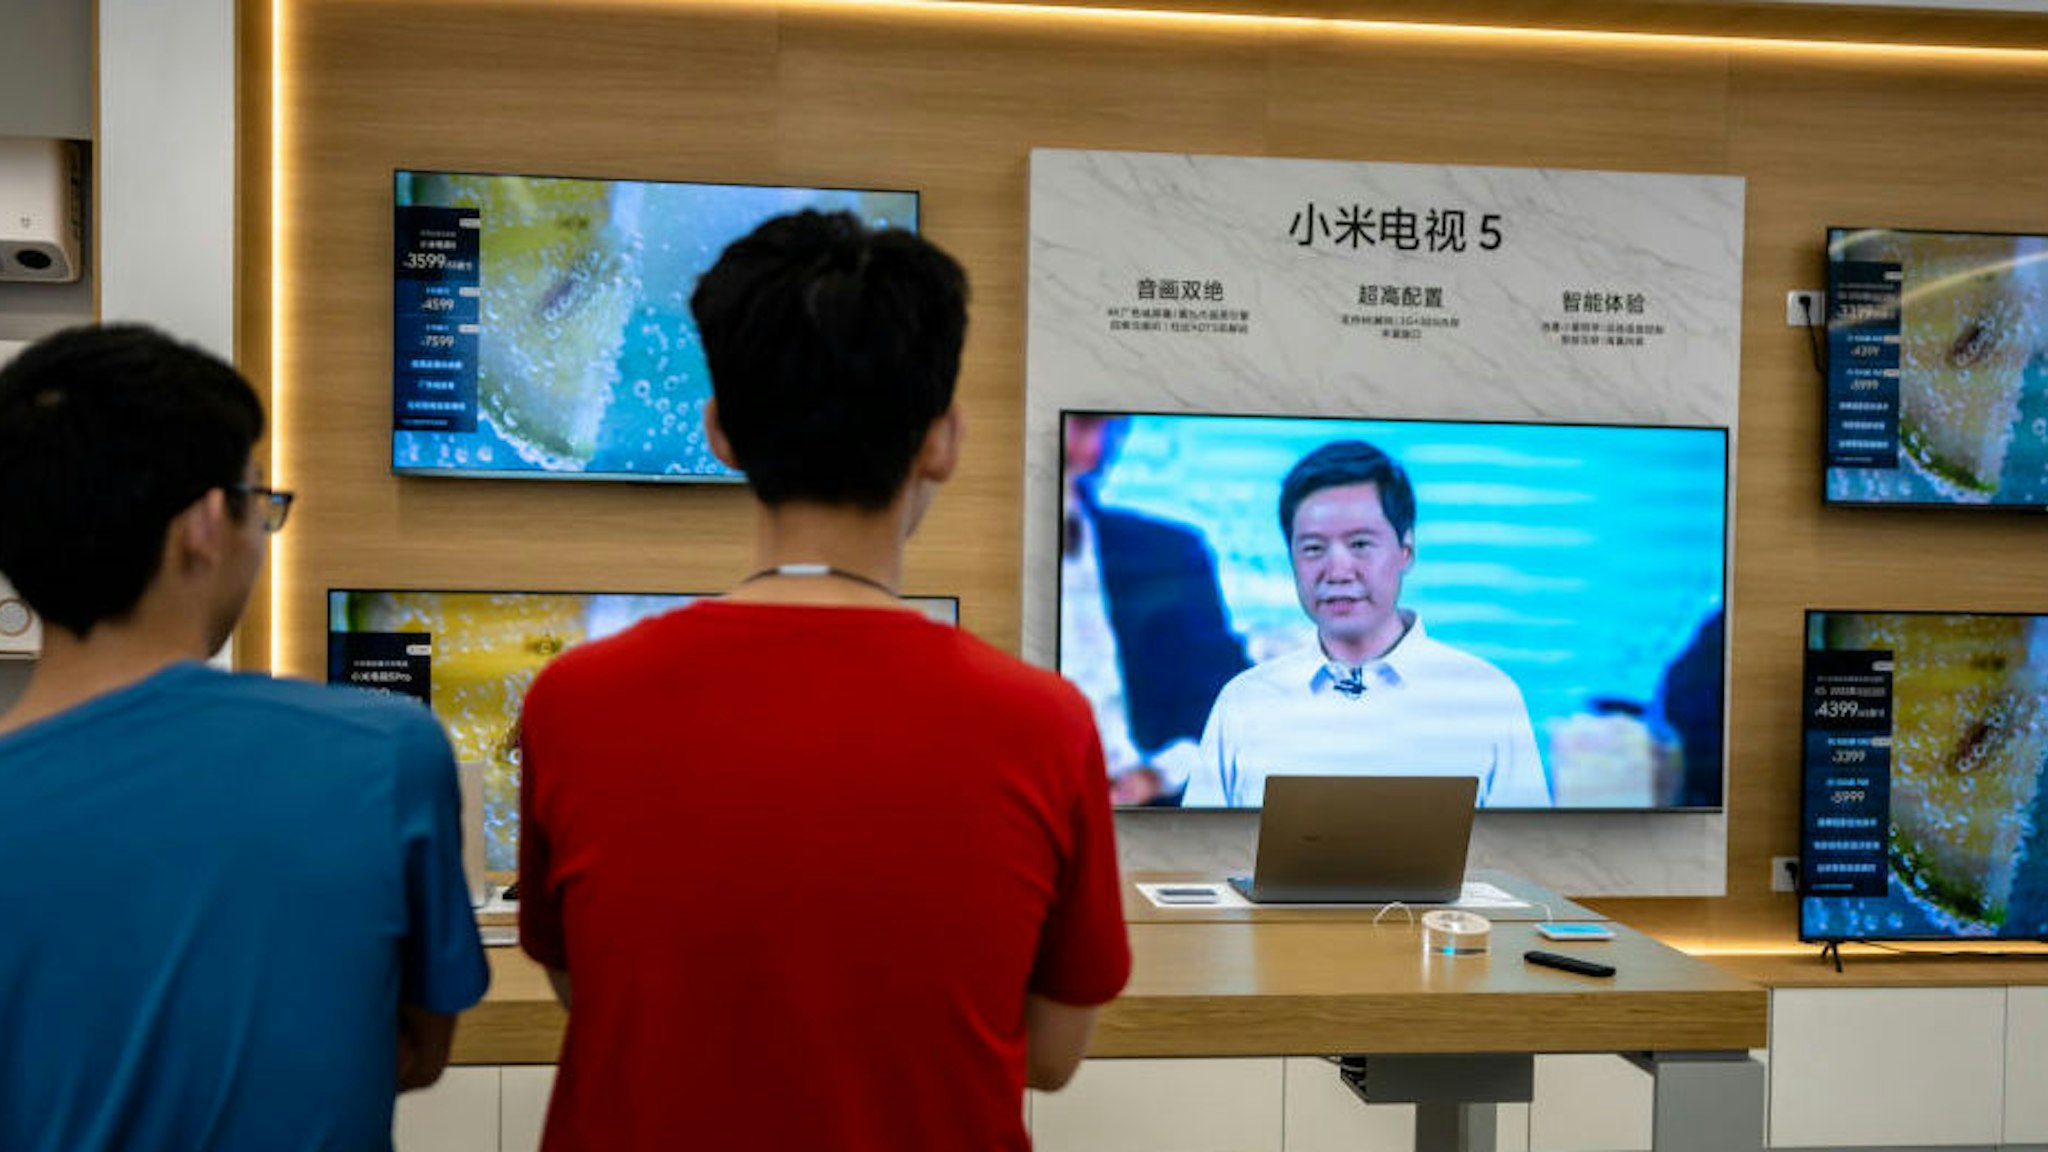 SHAOXING, CHINA - AUGUST 10: A TV inside a Xiaomi store broadcasts live Xiaomi's online product launch event on August 10, 2021 in Shaoxing, Zhejiang Province of China. Xiaomi founder and CEO Lei Jun launched Mi MIX 4 smartphones on Tuesday.